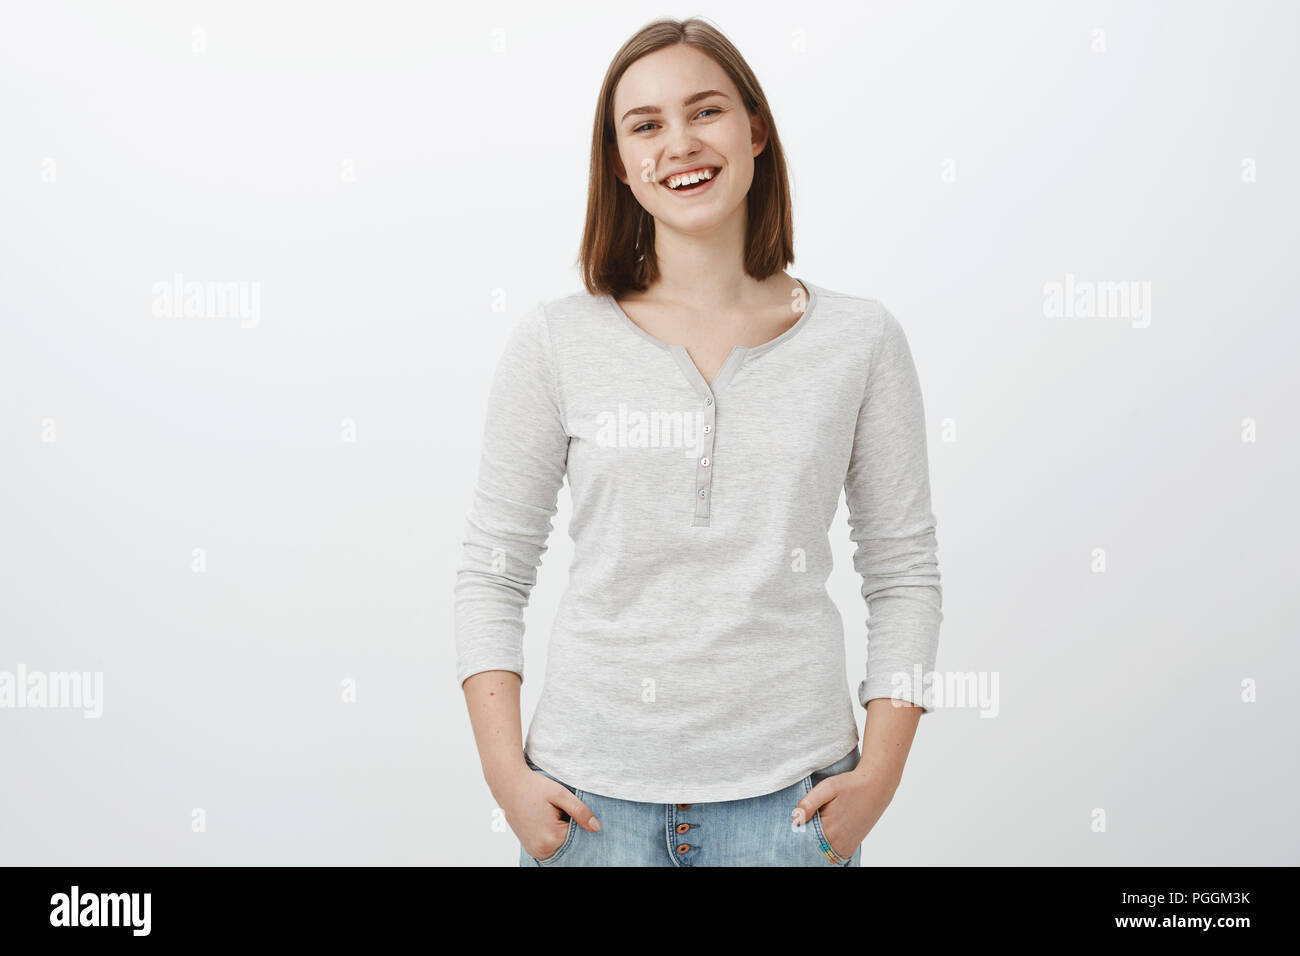 Girl feeling happy being teenager and living carefree life. Portrait of sociable friendly-looking charming female brunette holding hands in pockets casually and smiling joyfully at camera Stock Photo